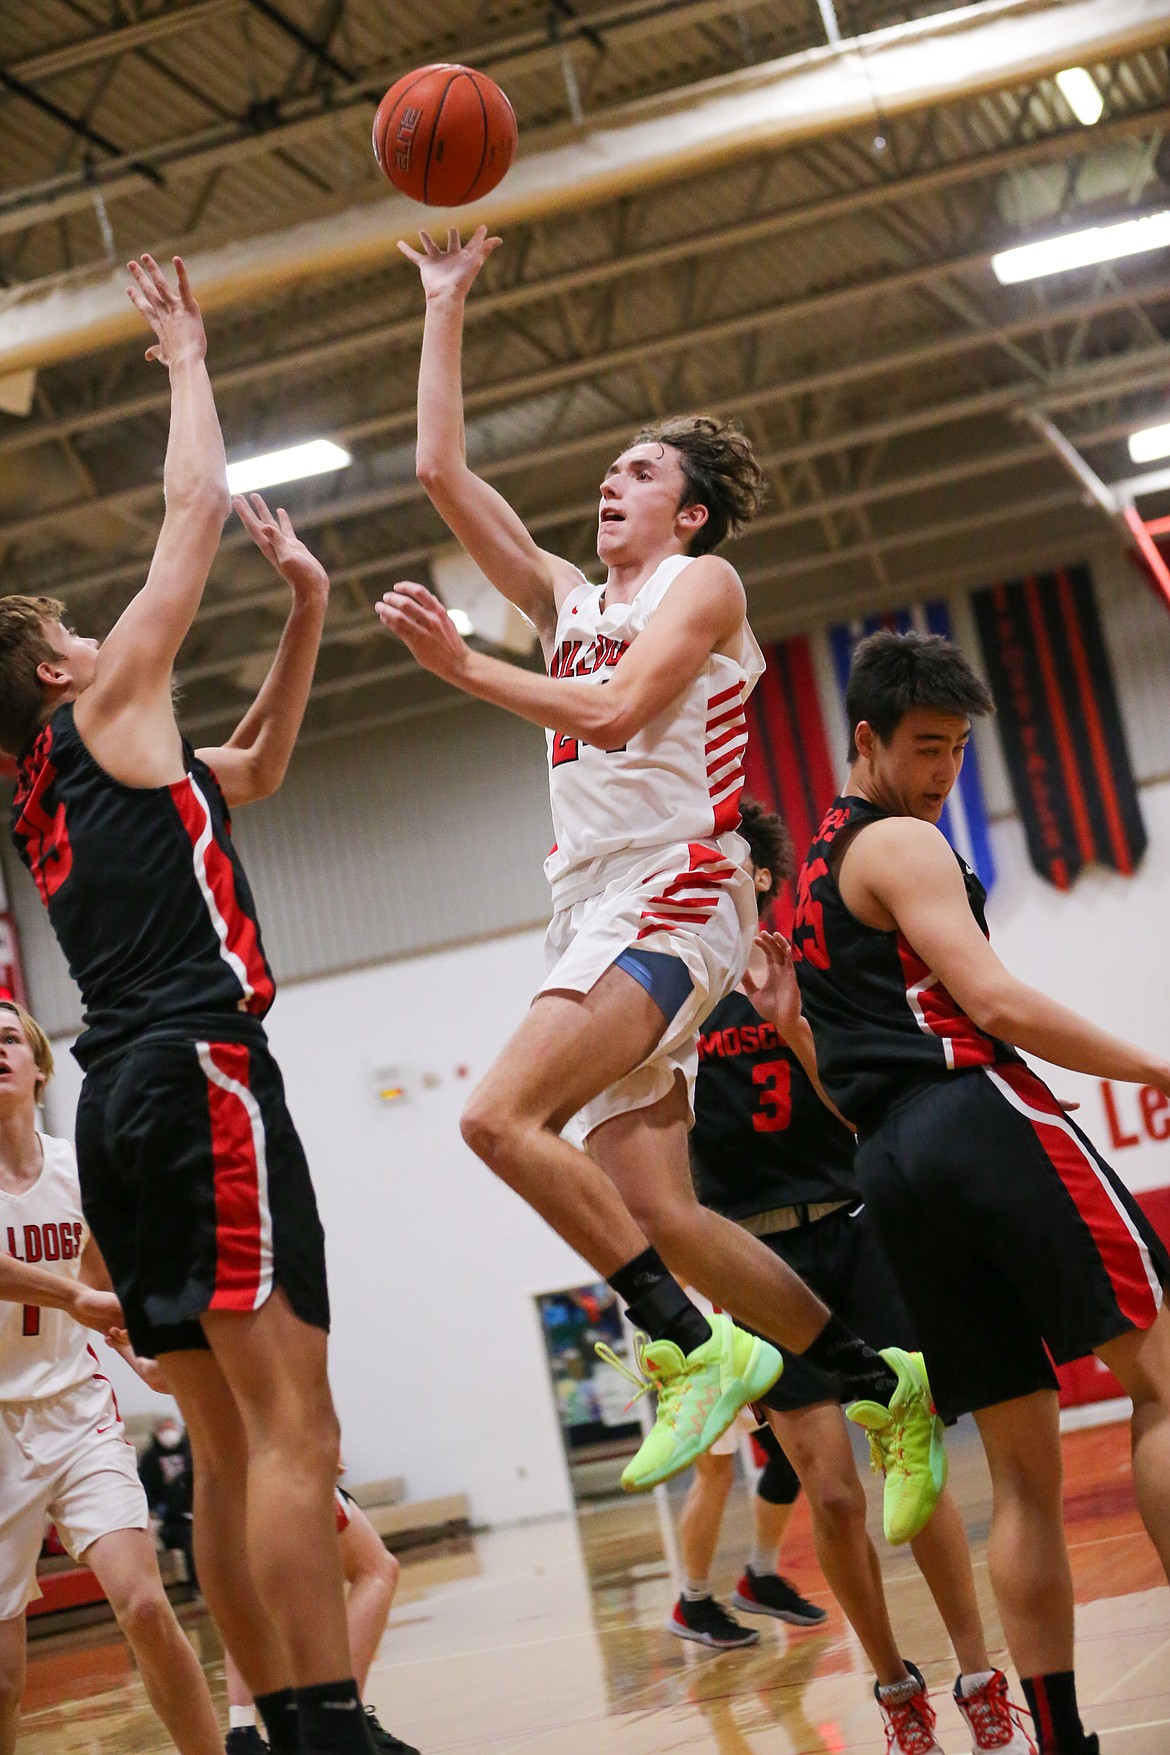 Sophomore Randy Lane drives to the basket and attempts a layup during the second half of Friday's game.